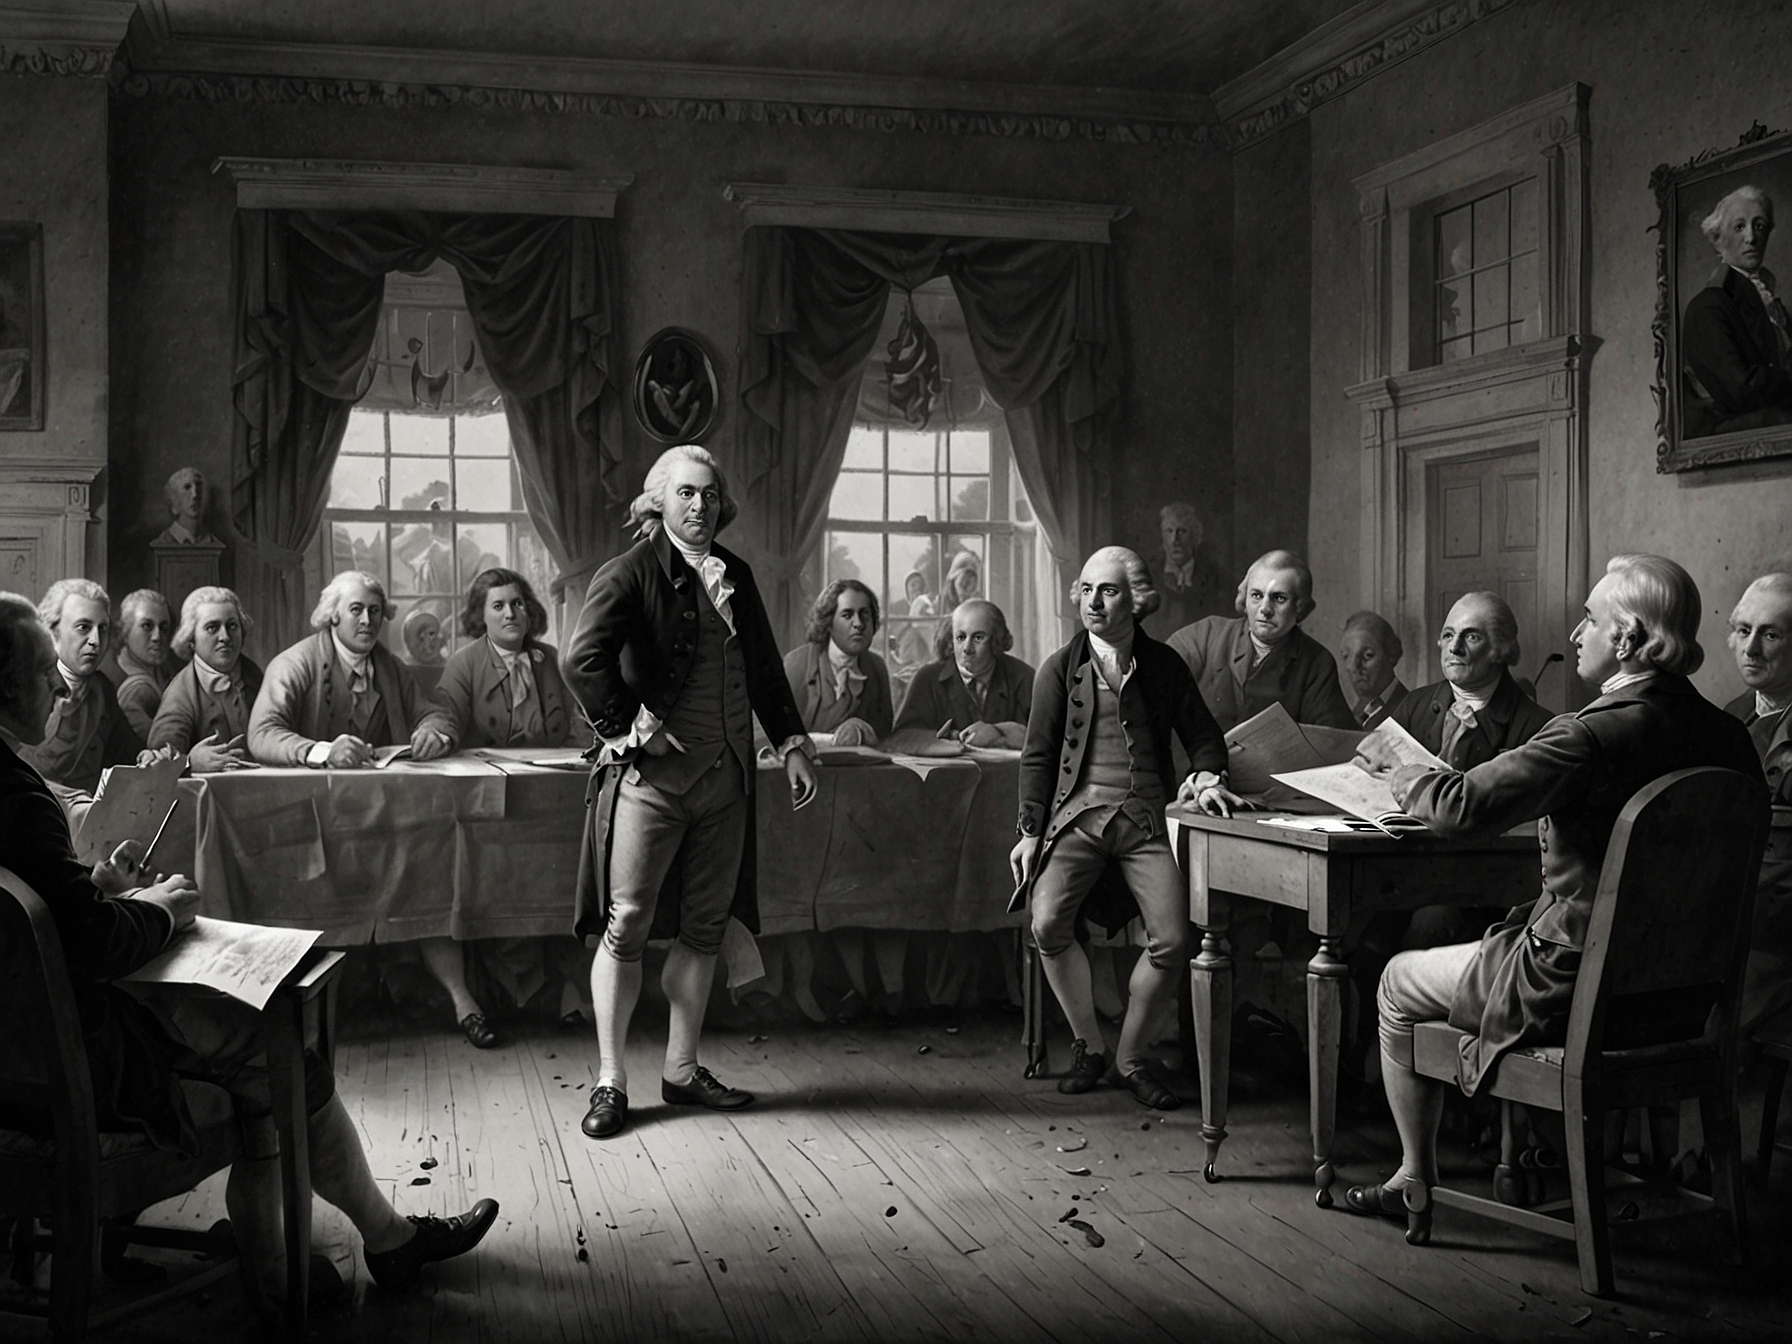 An illustration of the Continental Congress voting for independence on July 2, 1776, capturing the moment when the American colonies took a decisive step towards breaking away from British rule.